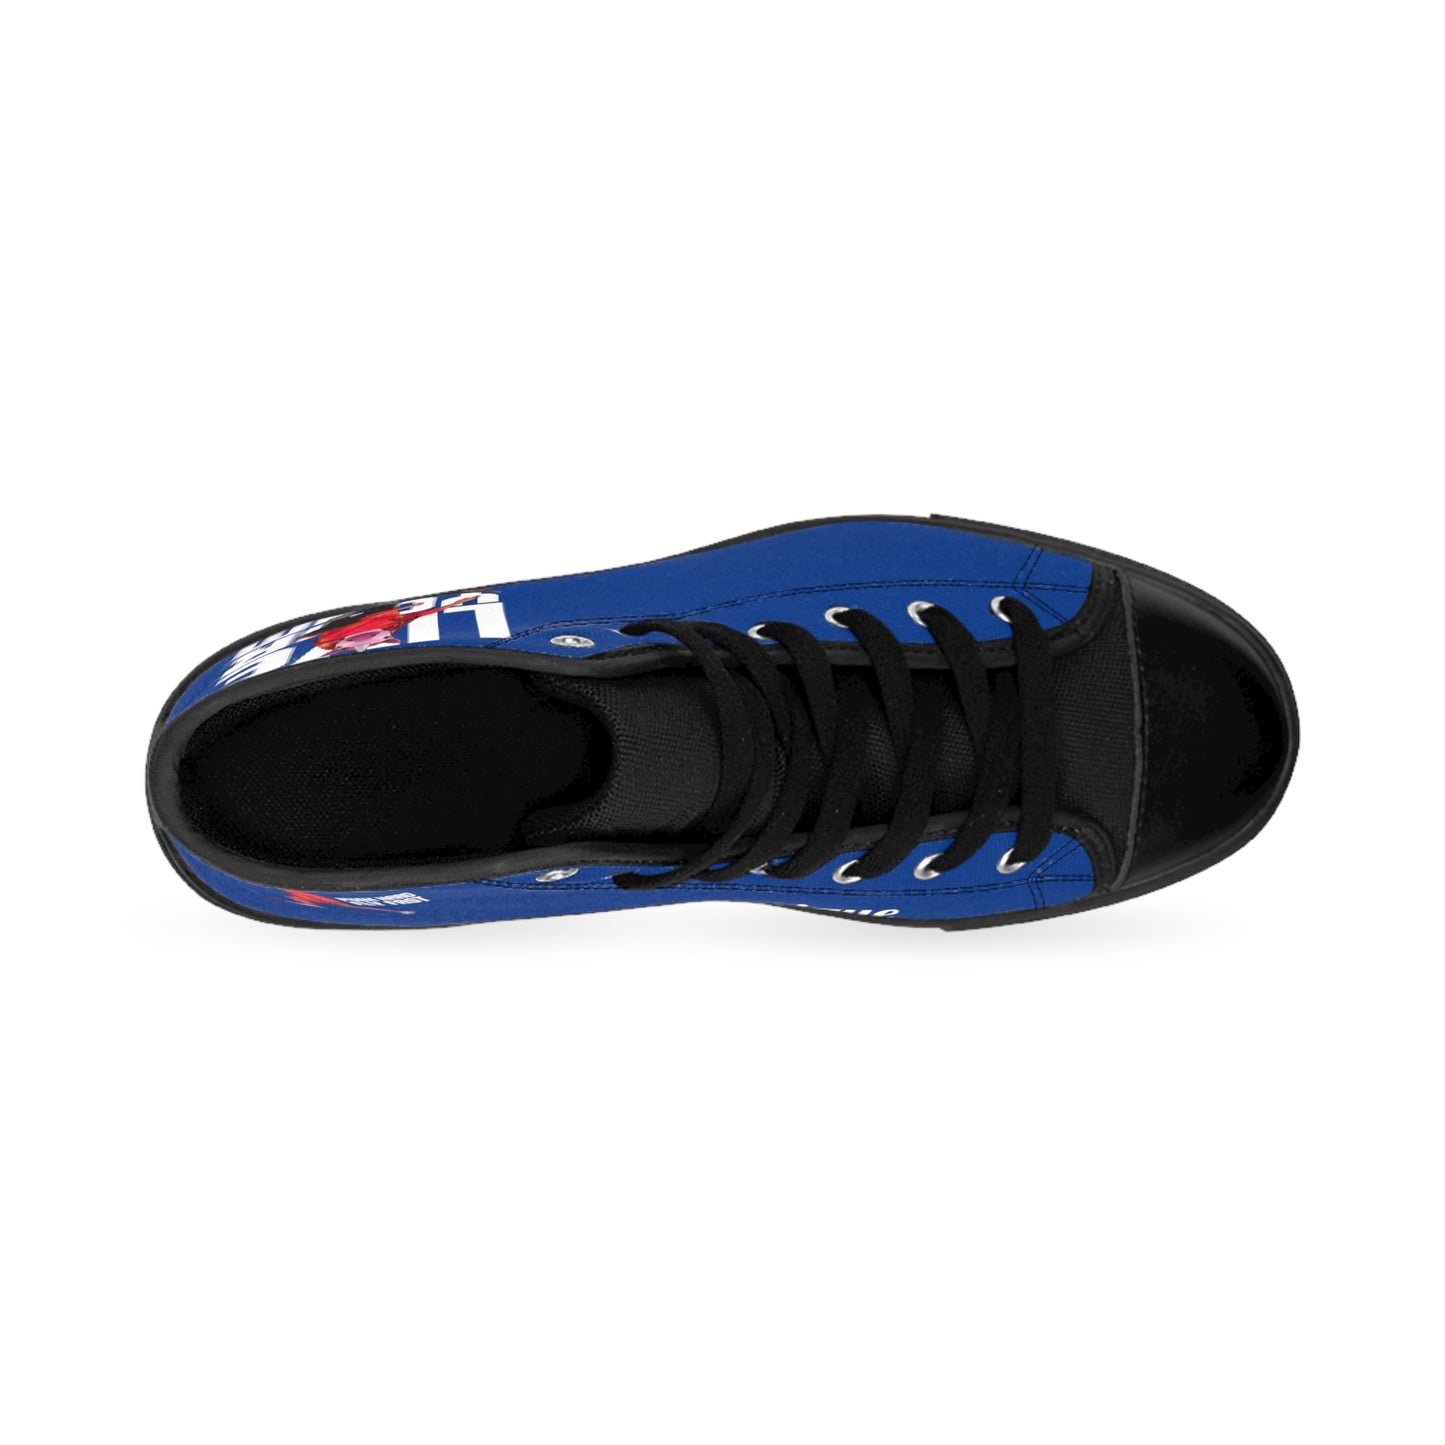 True Blue Live Your Dream High-top Sneakers